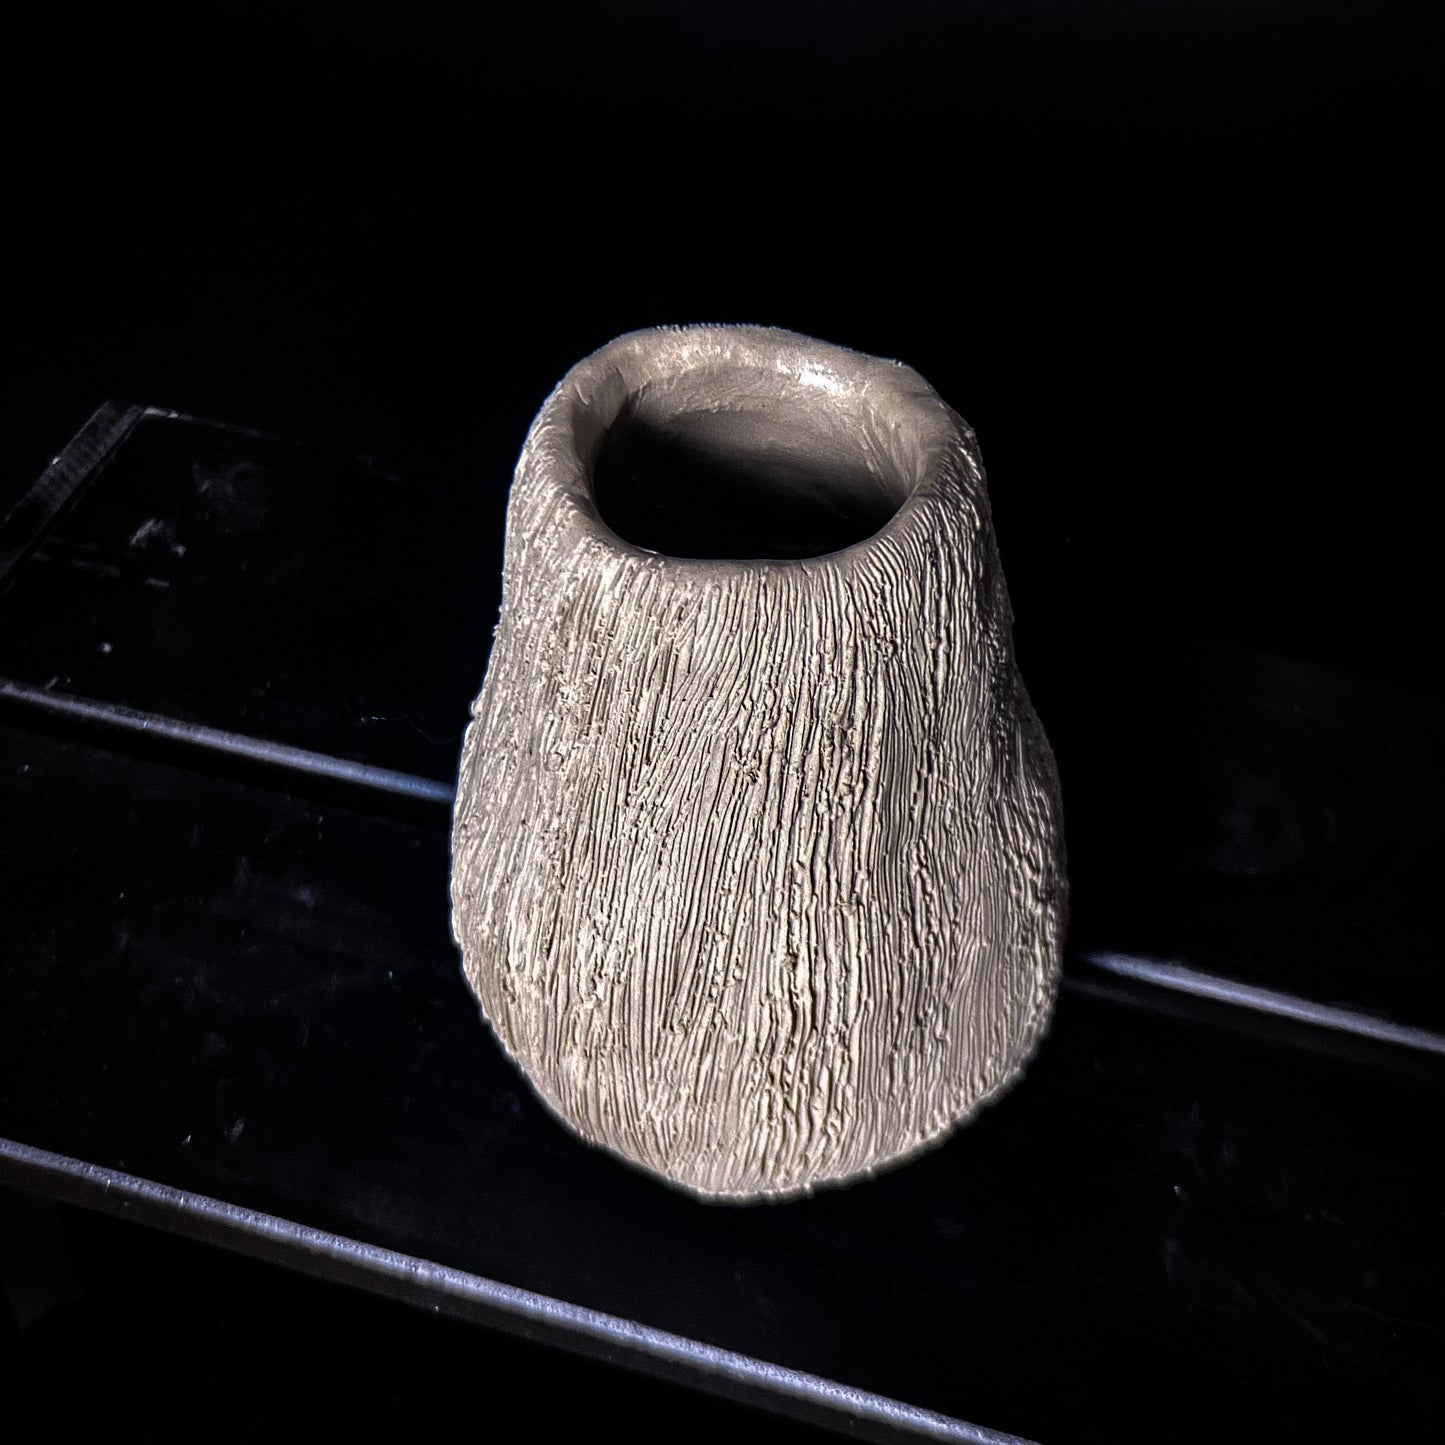 Vase - White clay with rough, textured finish